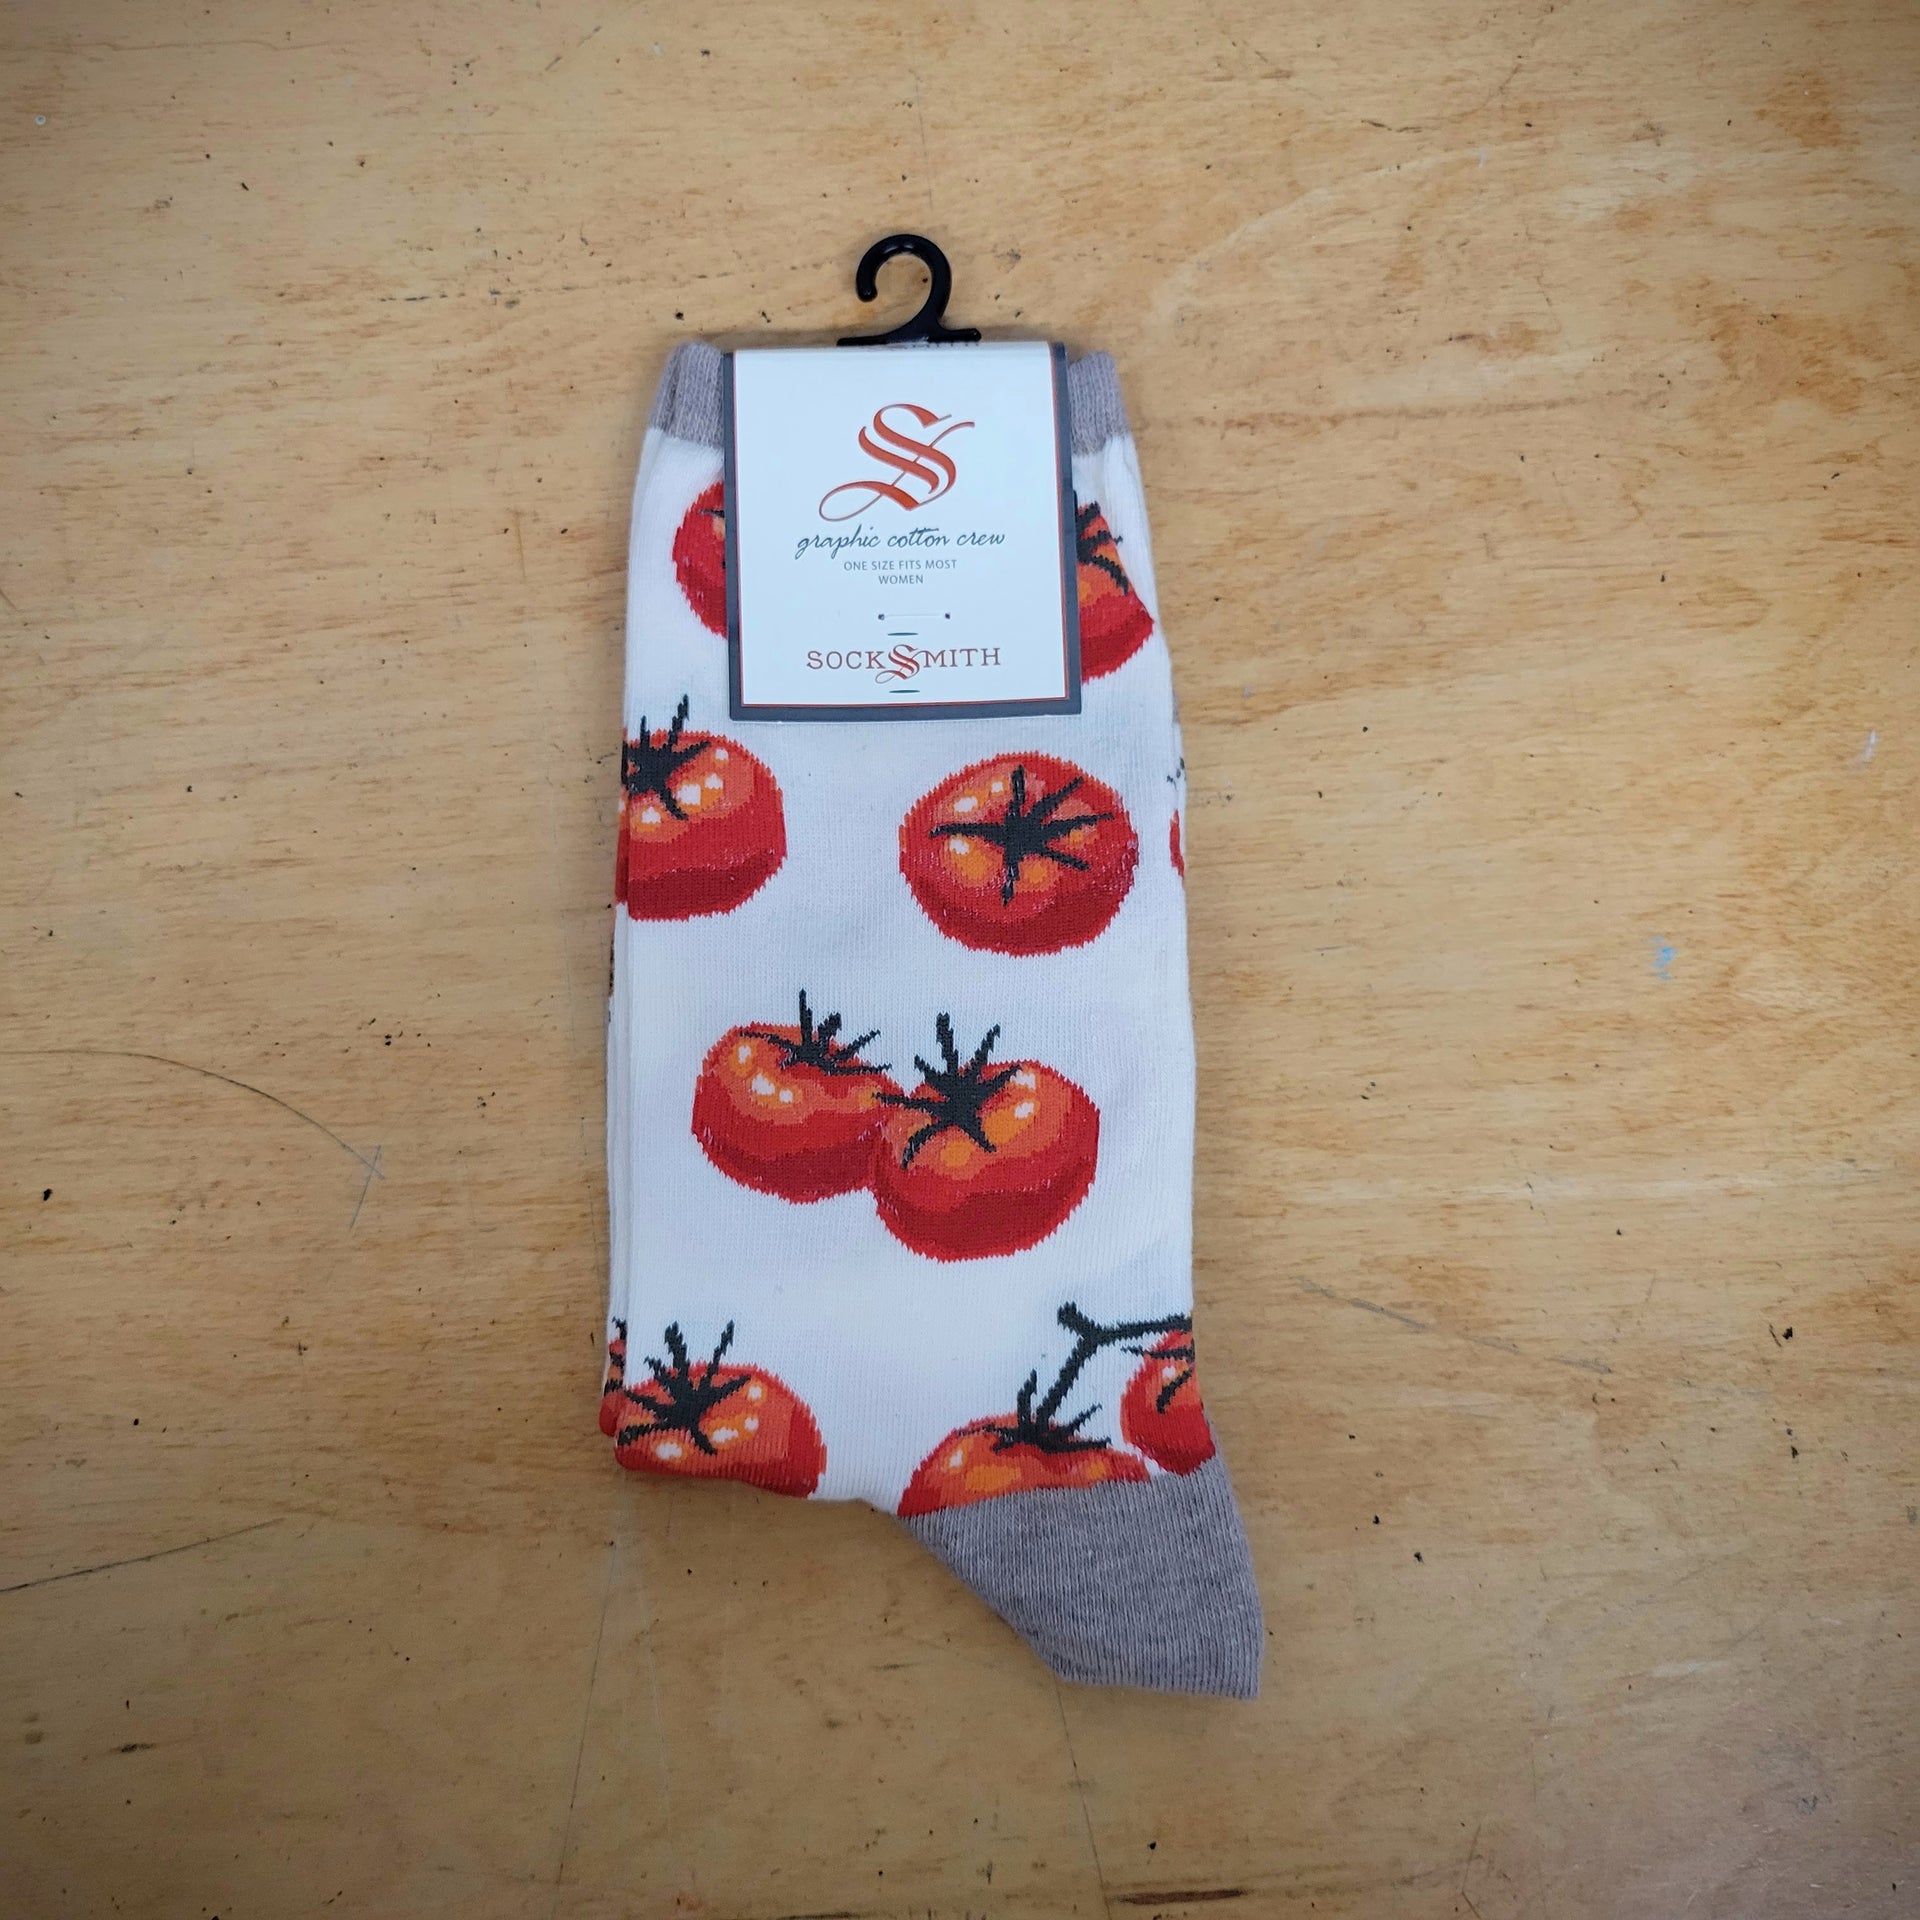 An ivory pair of socks with tomatoes on them.